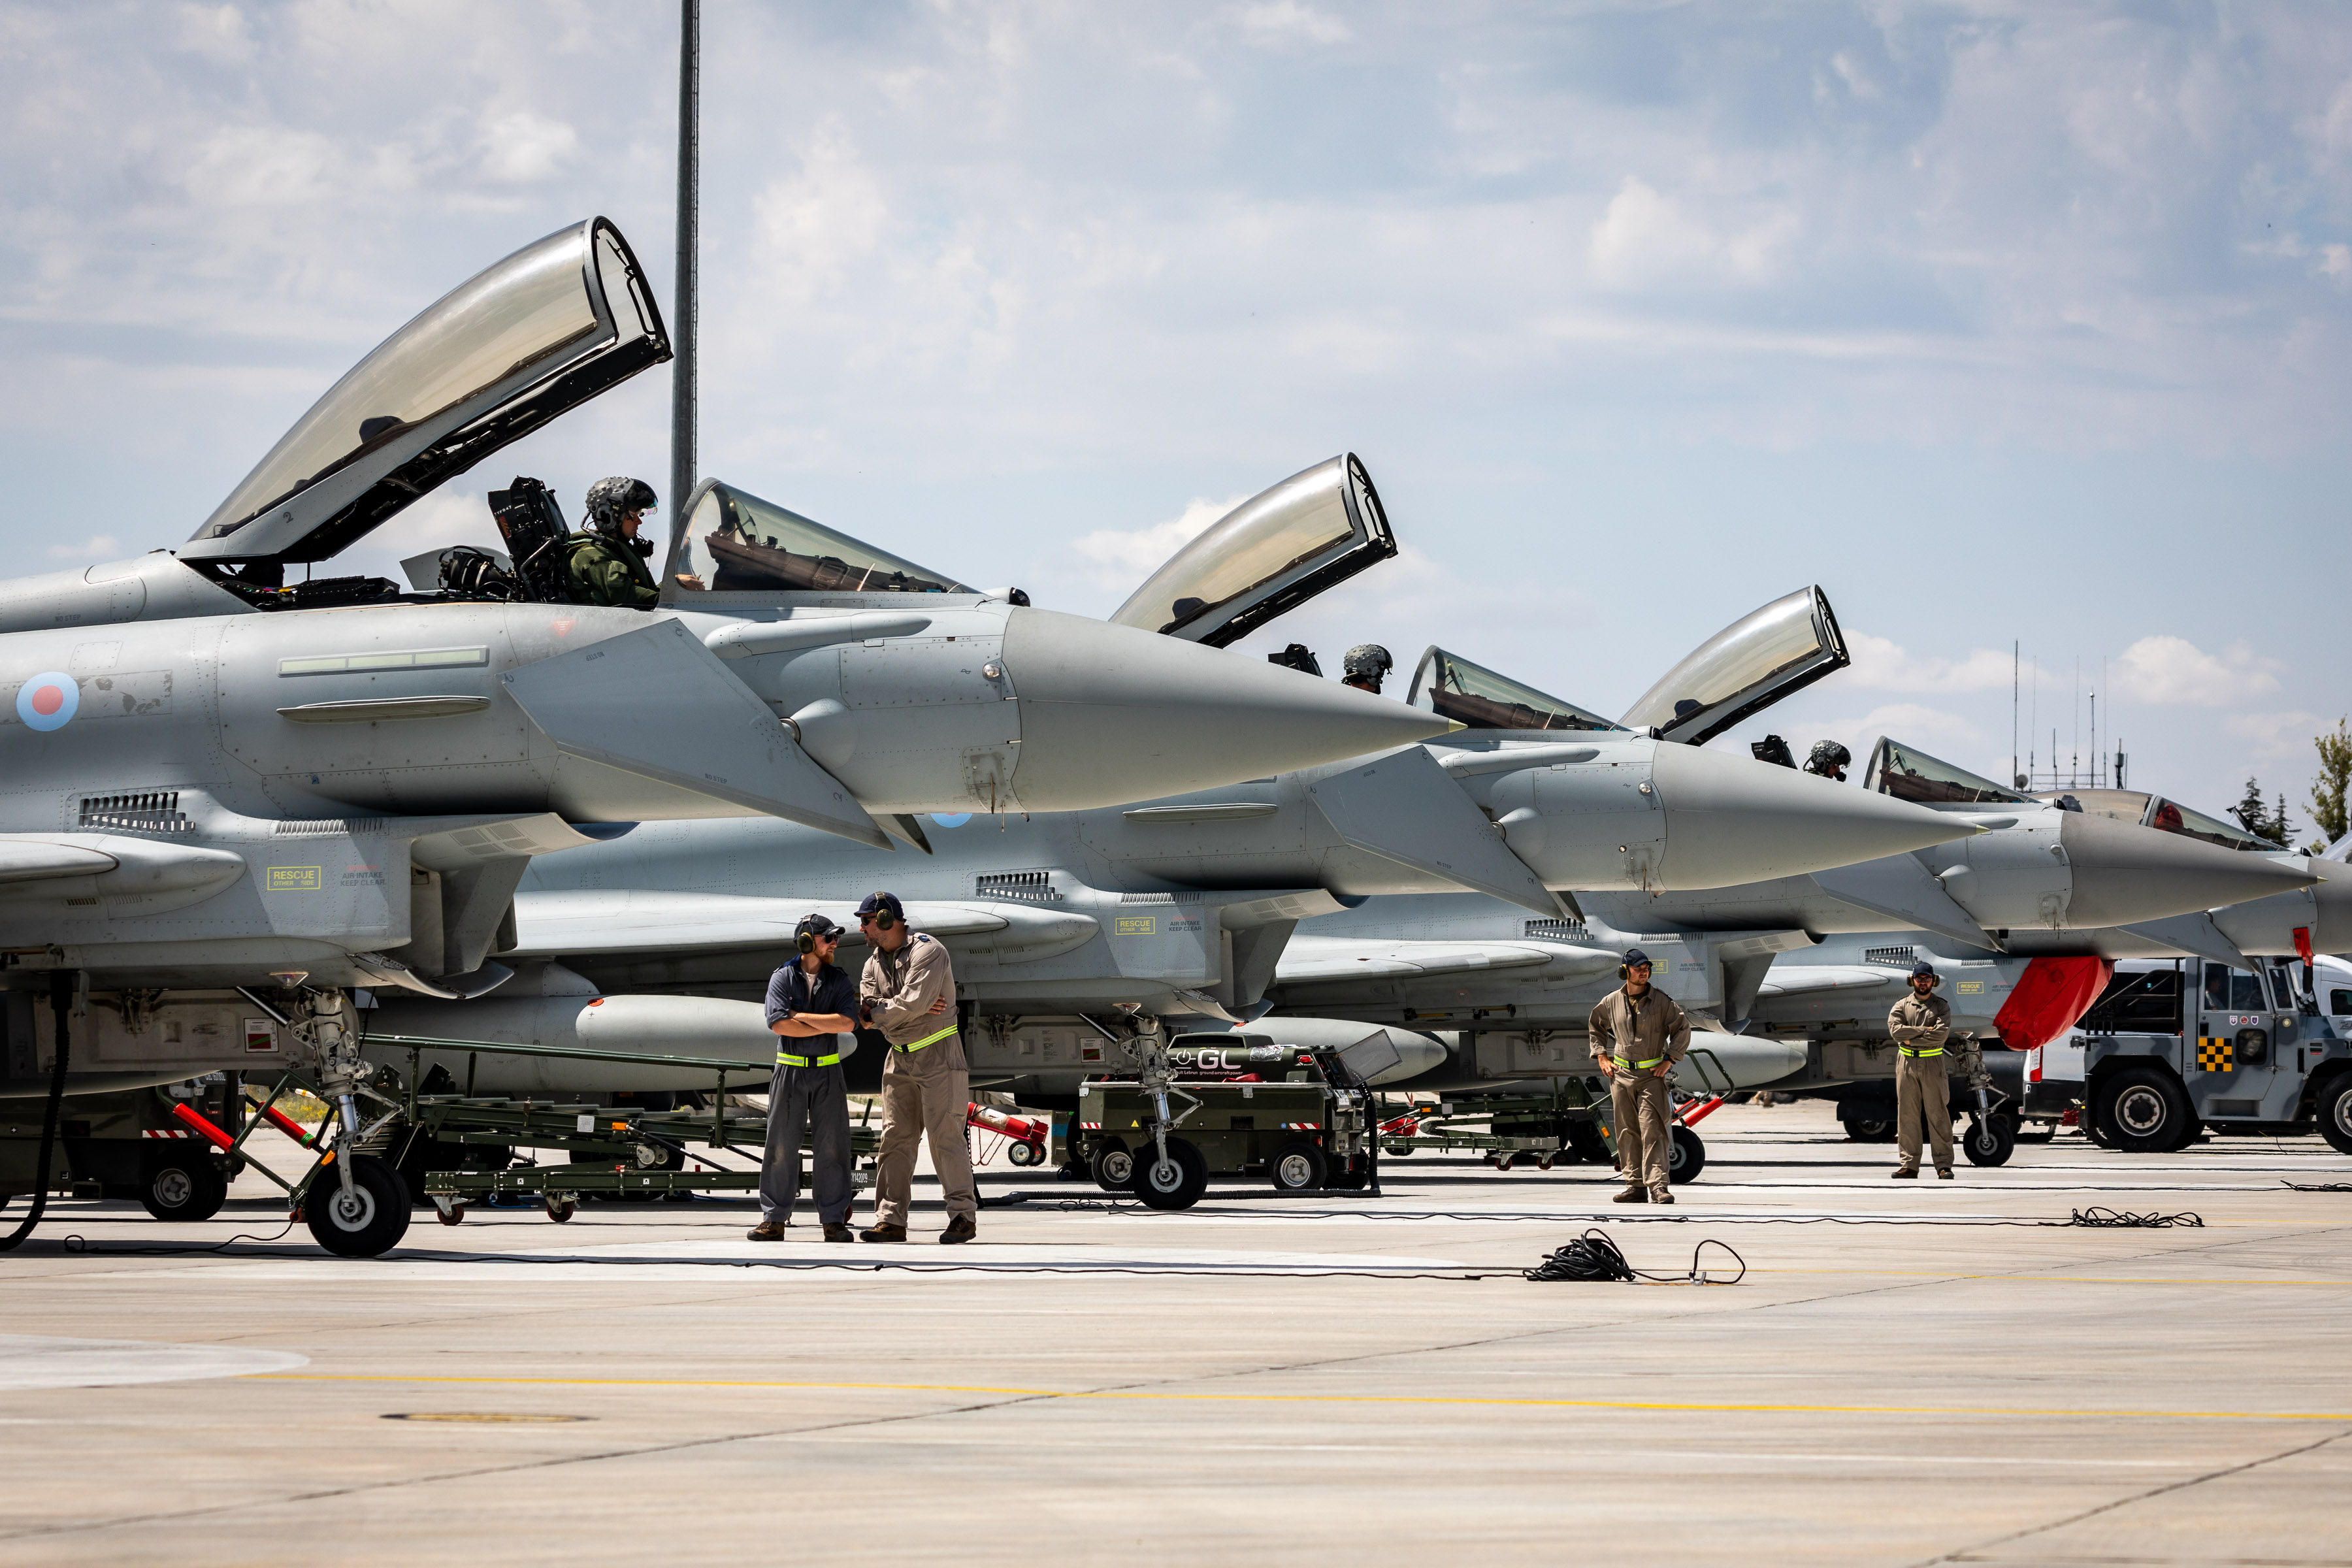 Image shows aviators standing by row of Typhoon aircraft on the airfield.